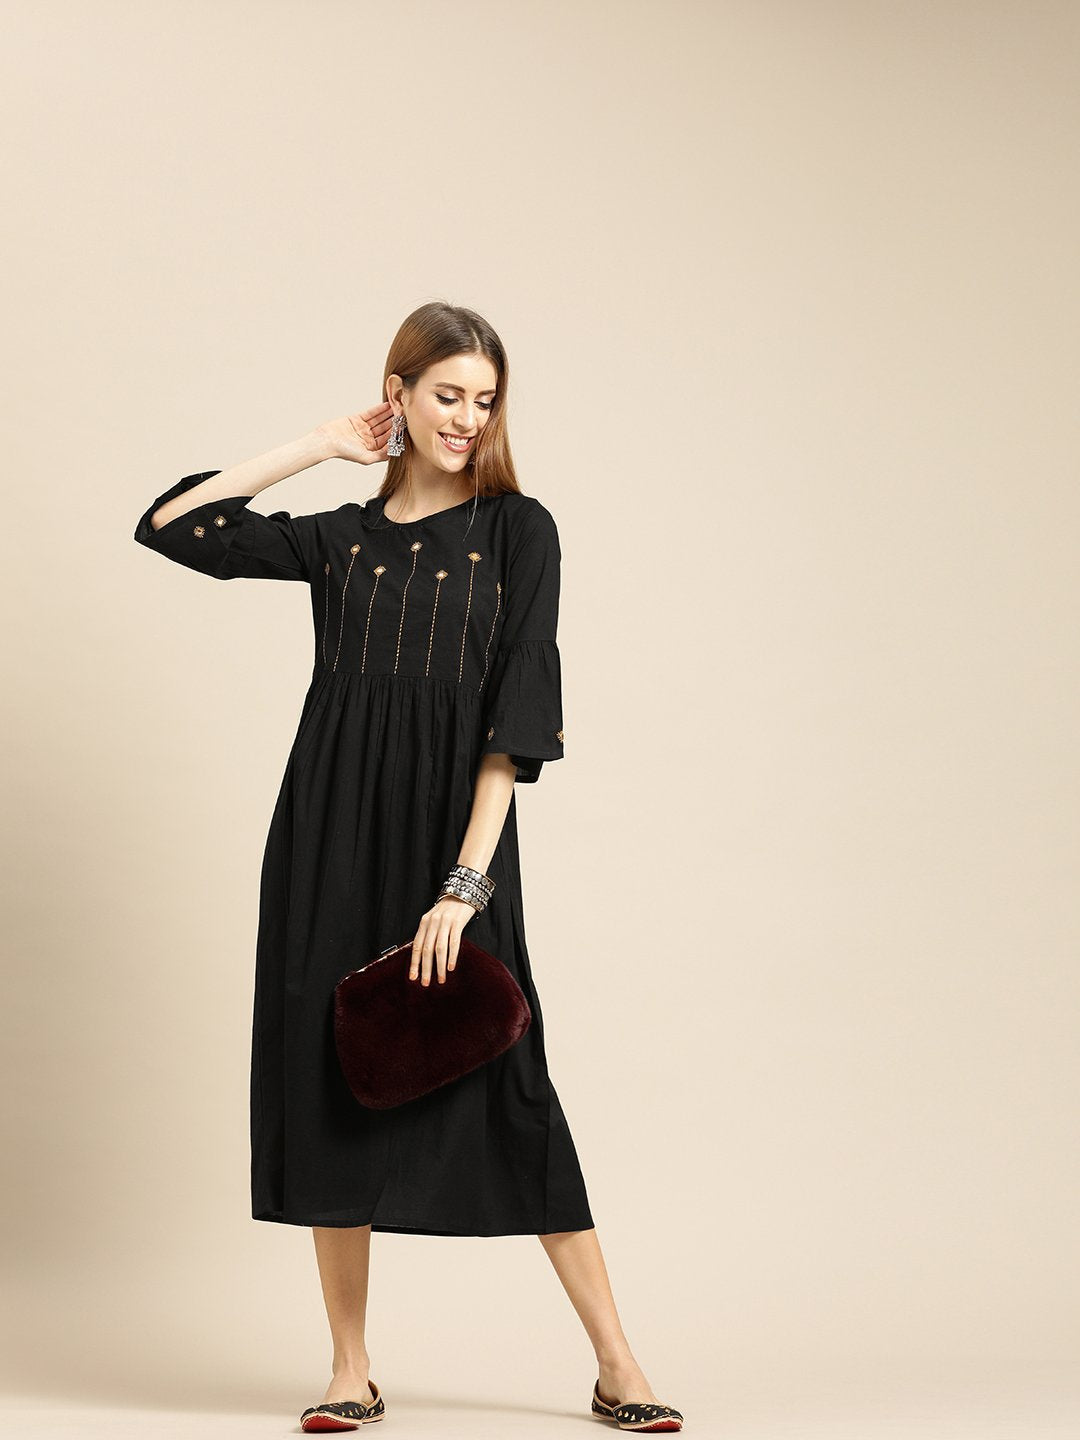 Women's Black Solid Solid Round Neck Cotton A-Line Dress - Nayo Clothing